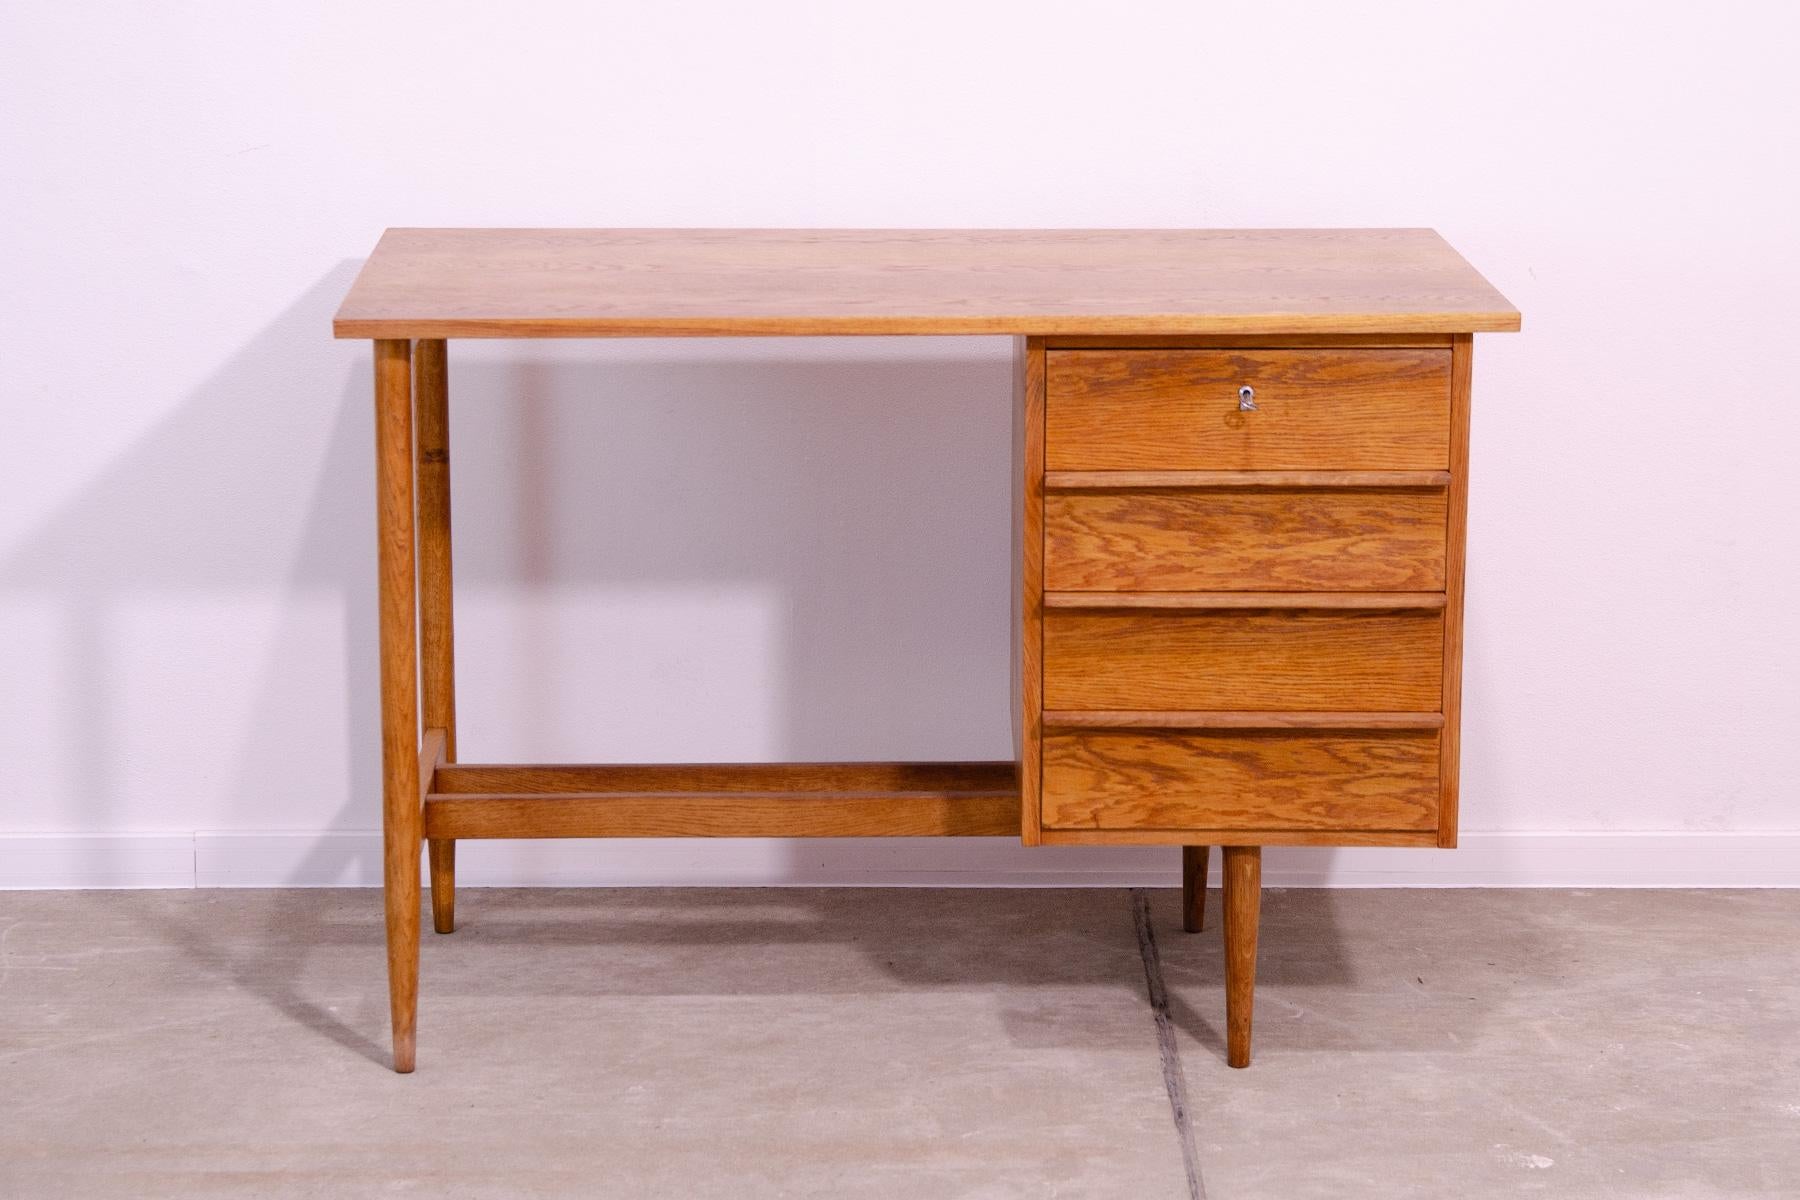 This midcentury  ladies writing desk was made in the former Czechoslovakia in the 1960´s. It’s made of beech wood. Plastic drawers inside. Very simple design. In excellent condition, fully renovated.

Dimensions:

length: 110 cm, height: 75 cm,